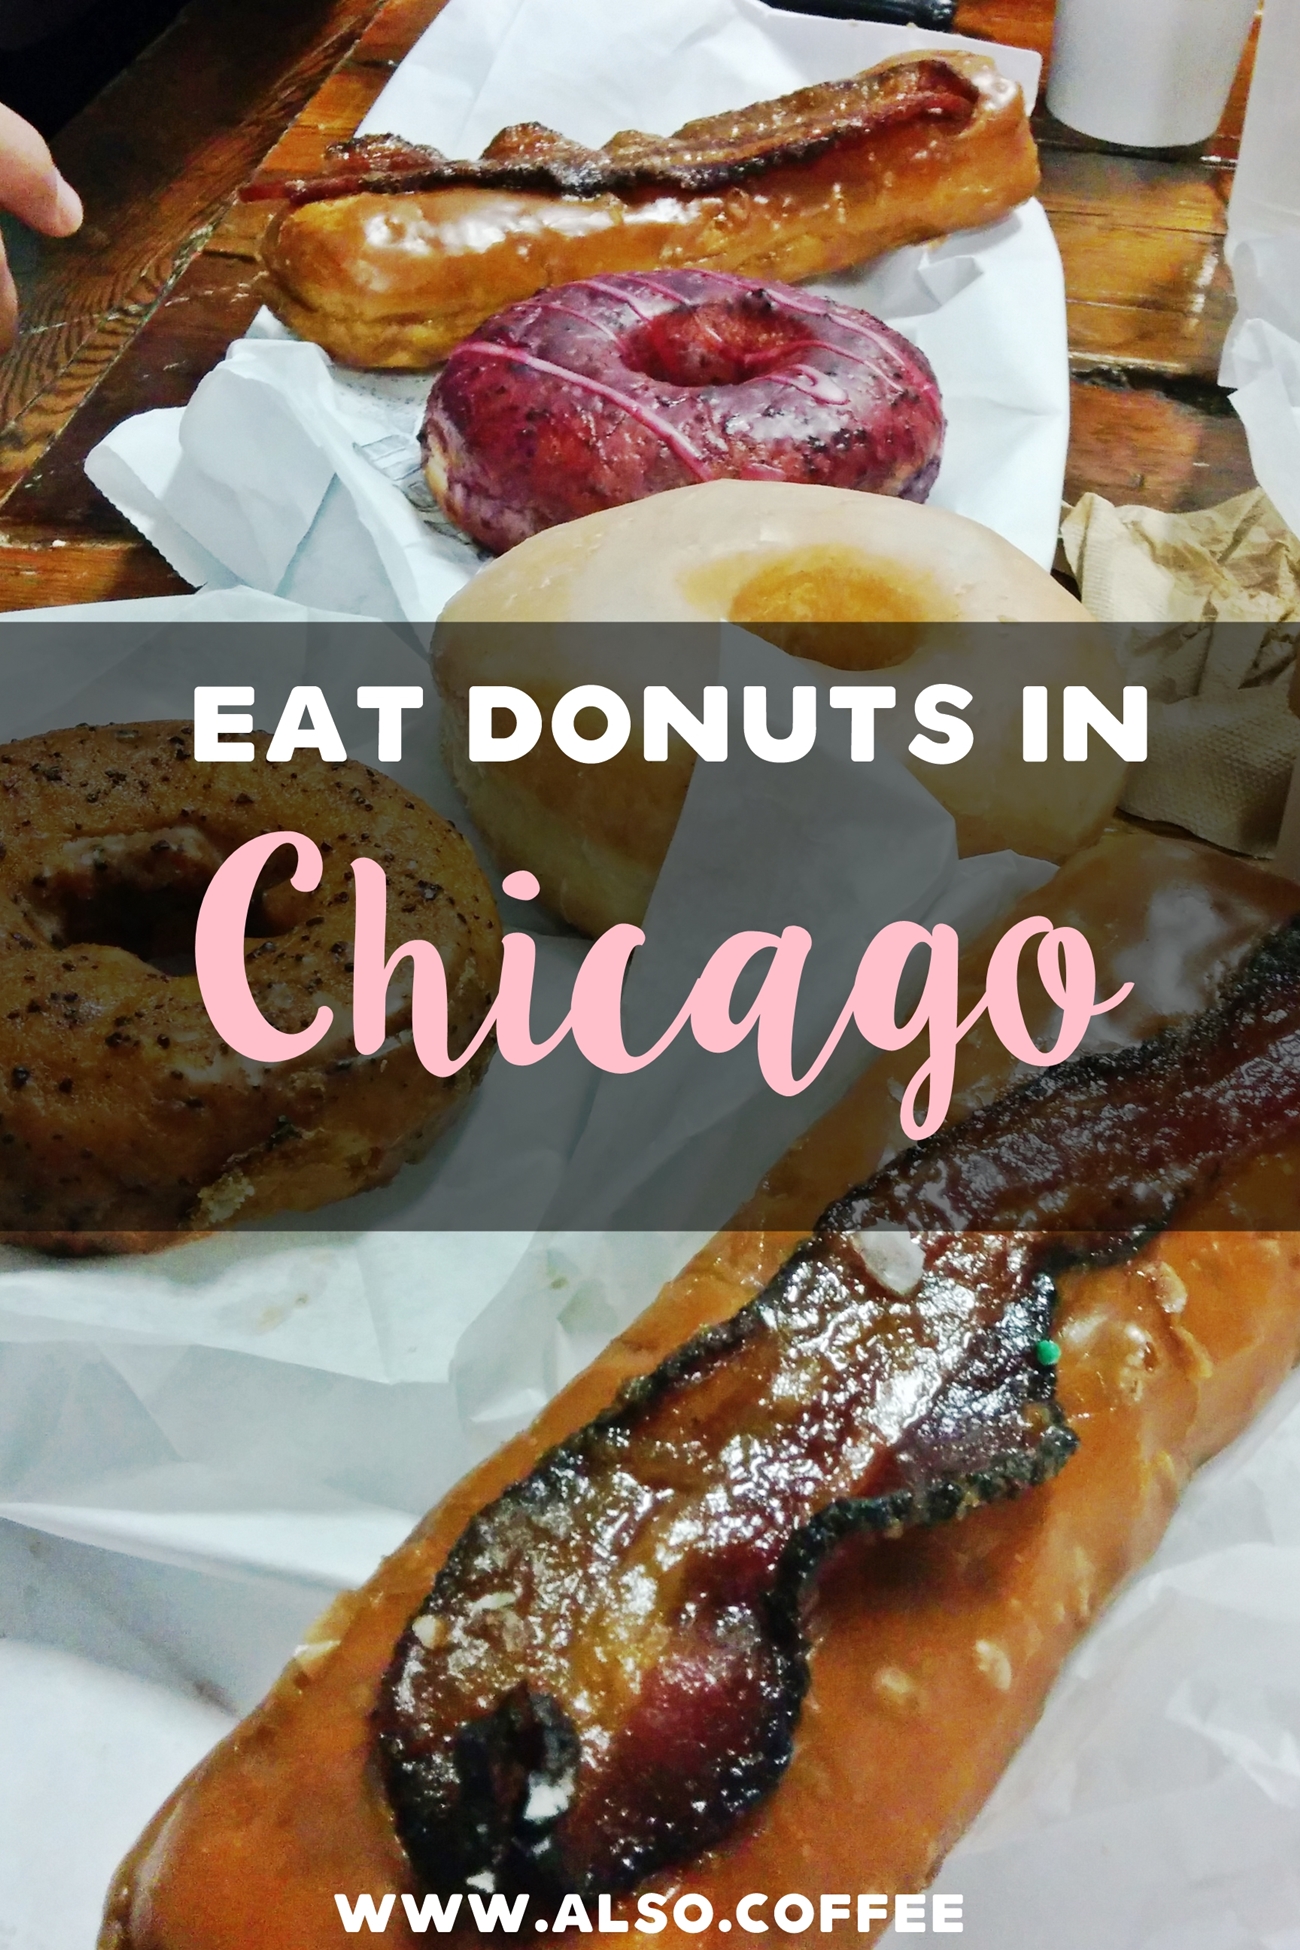 Glazed & Infused in Chicago, Ill